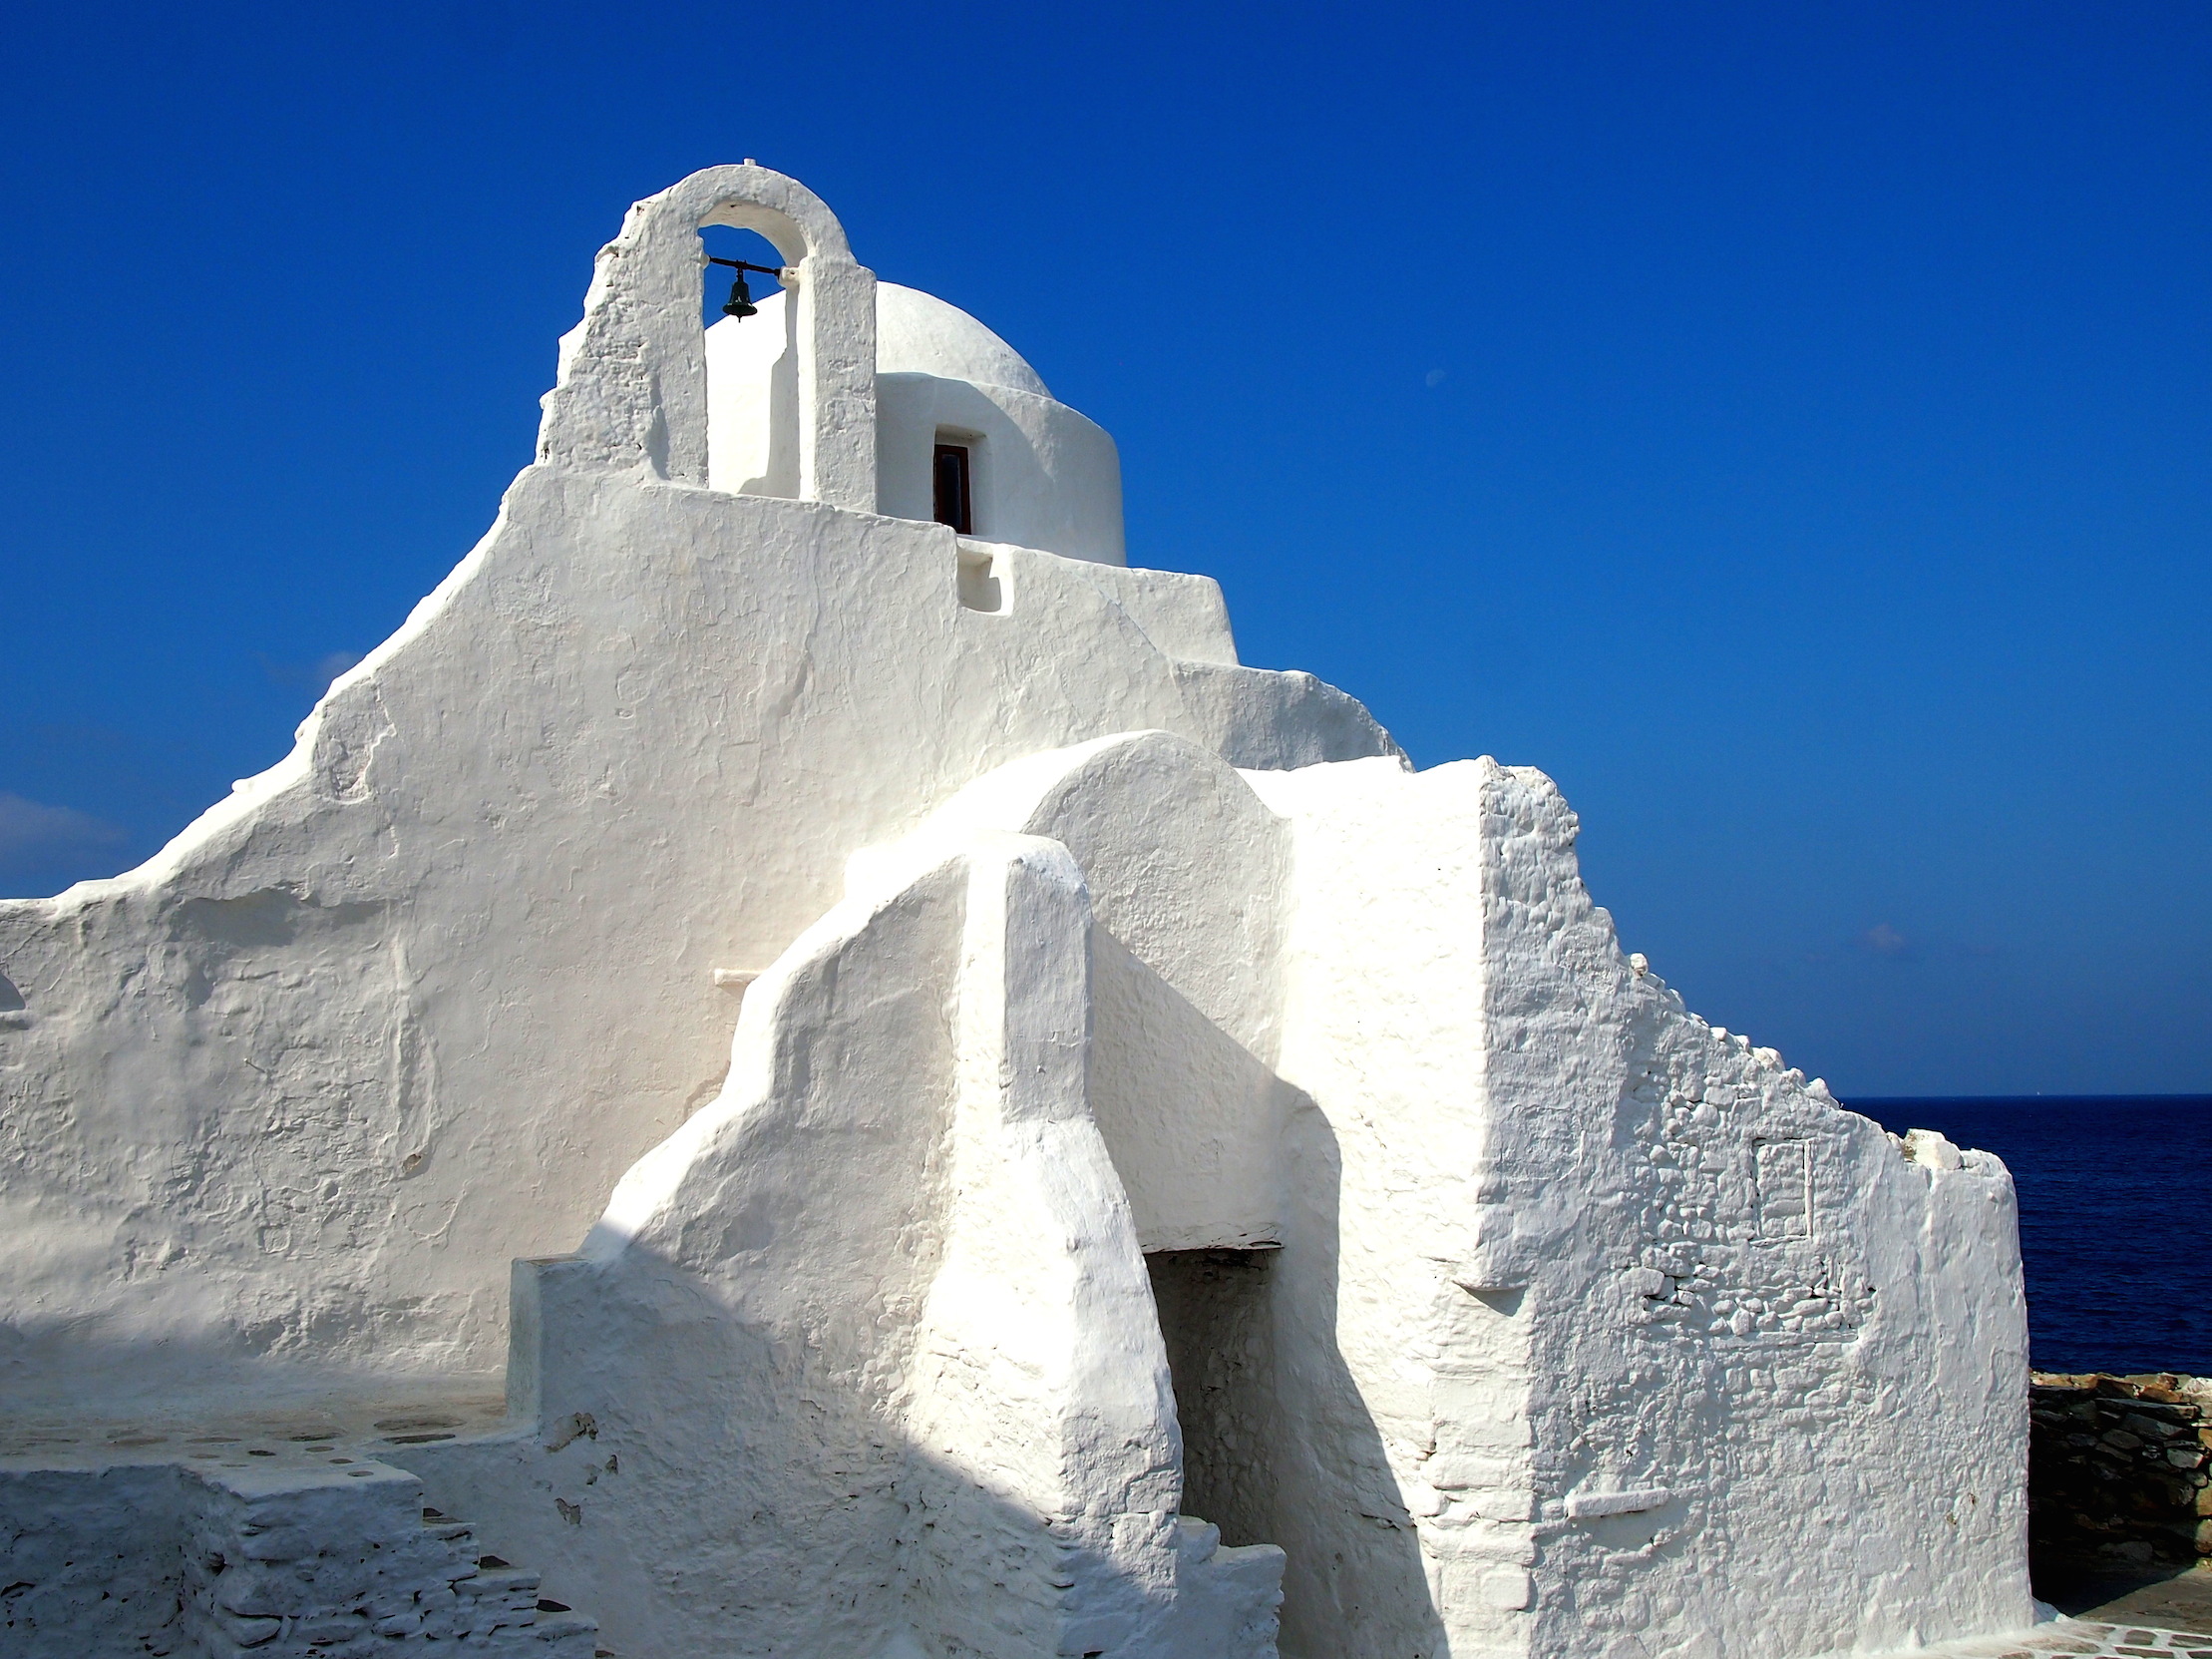 10 Best Things to do in Mykonos, Greece [with Suggested Tours]